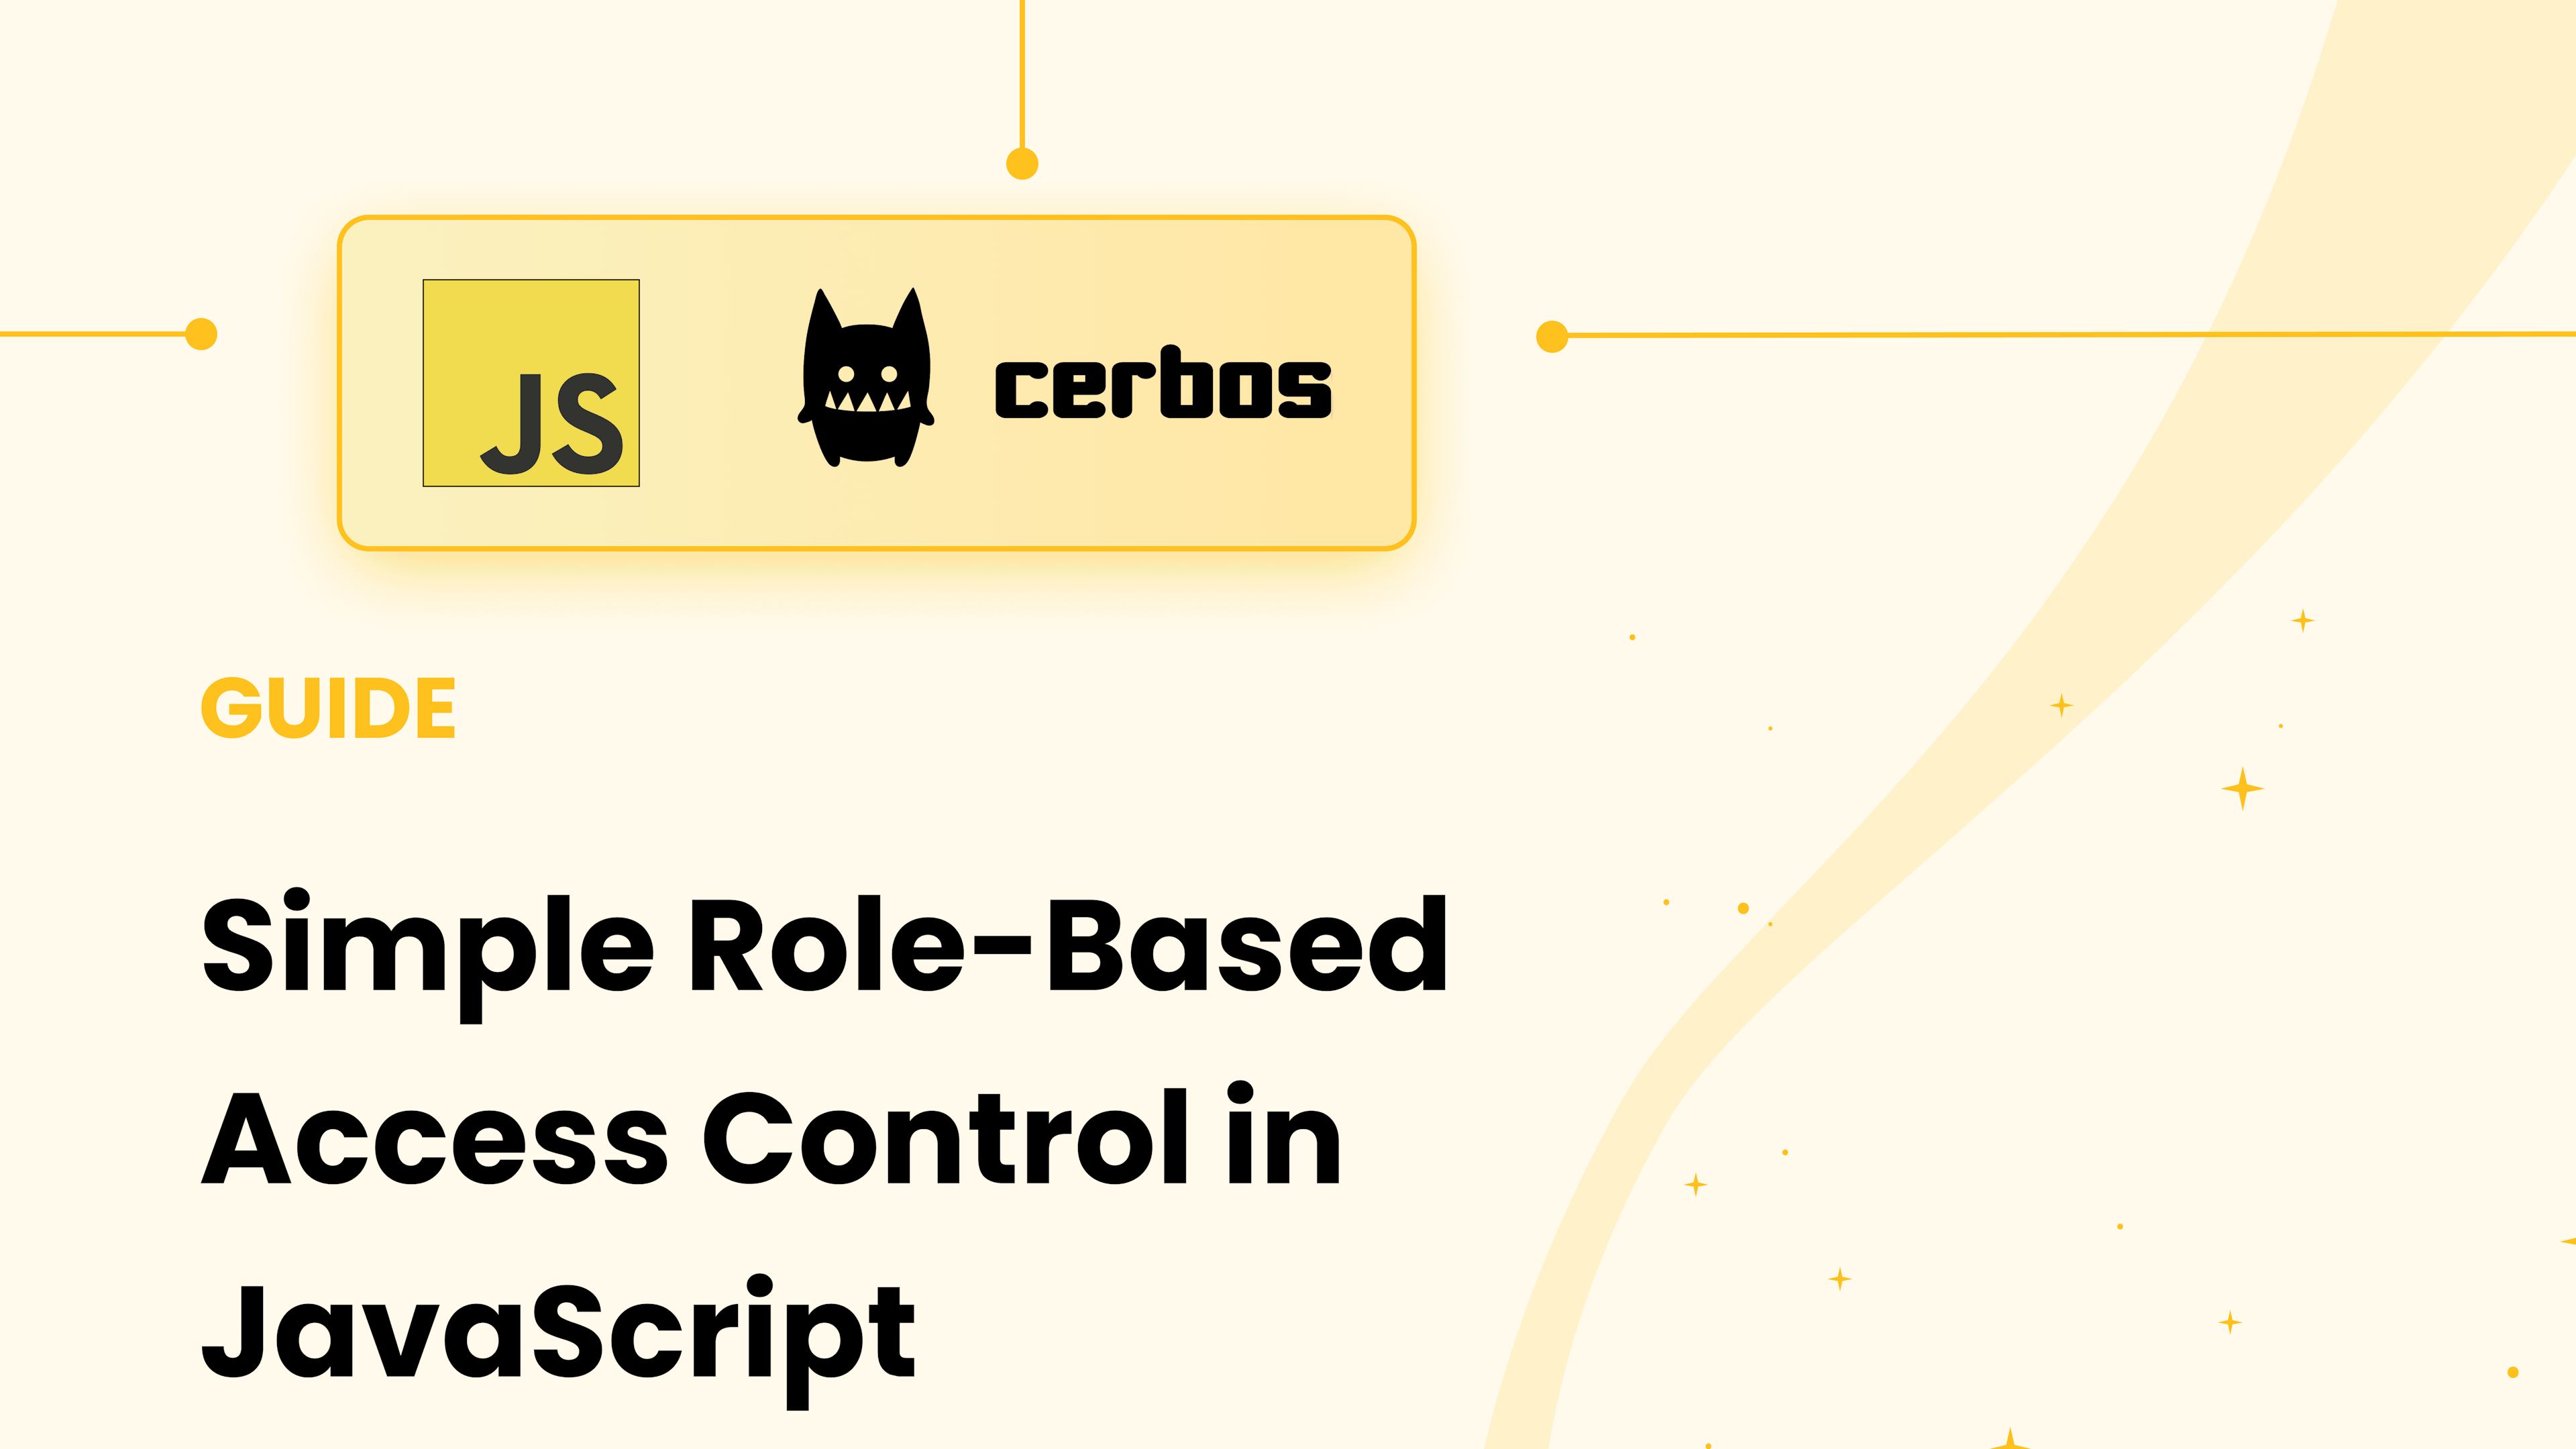 Simple Role-Based Access Control in JavaScript